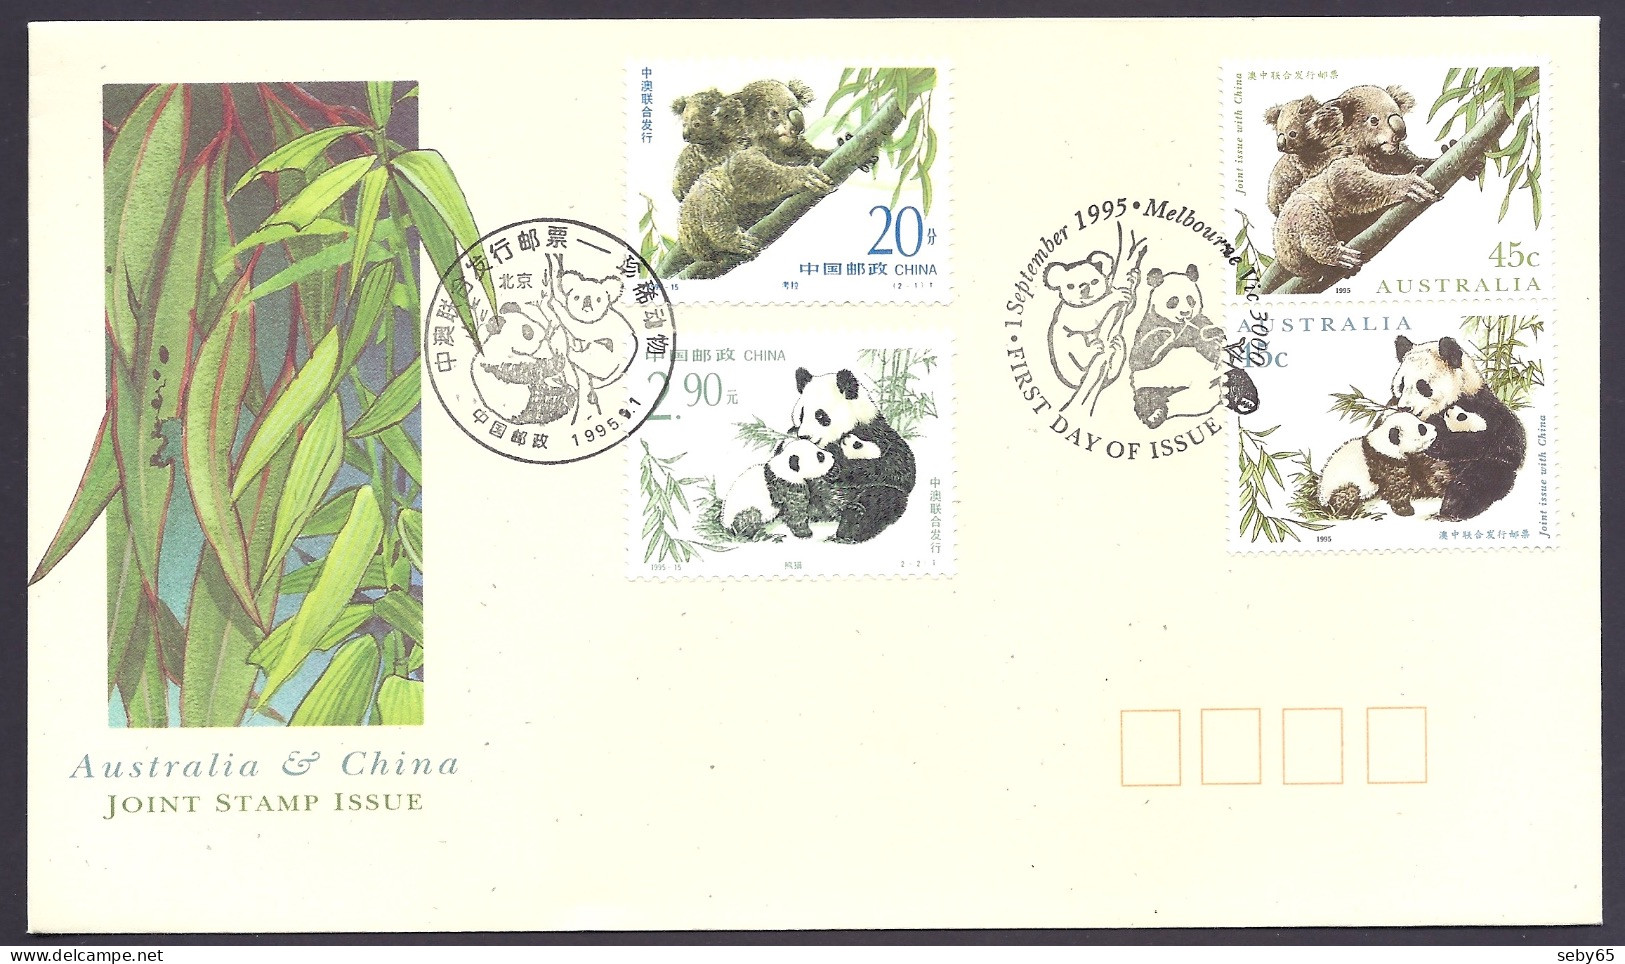 Australia 1995 - Fauna, Wild Endangered Animals, Koalas, Panda, Joint Issue With China, 4 Stamps  - FDC - Primo Giorno D'emissione (FDC)